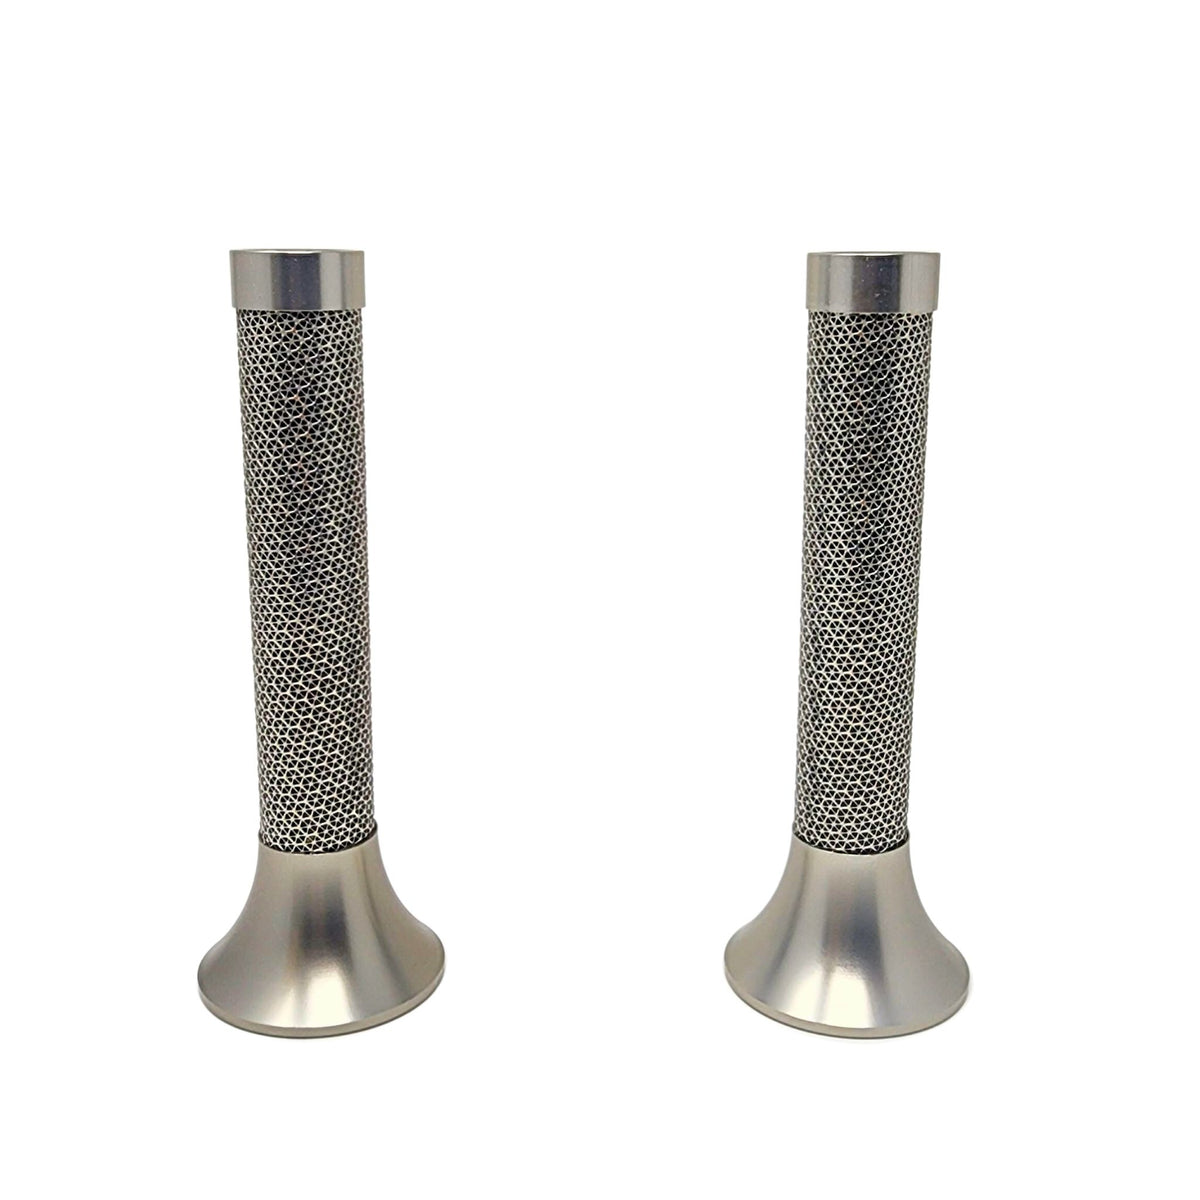 Stainless steel metal lace pattern candleholders. 